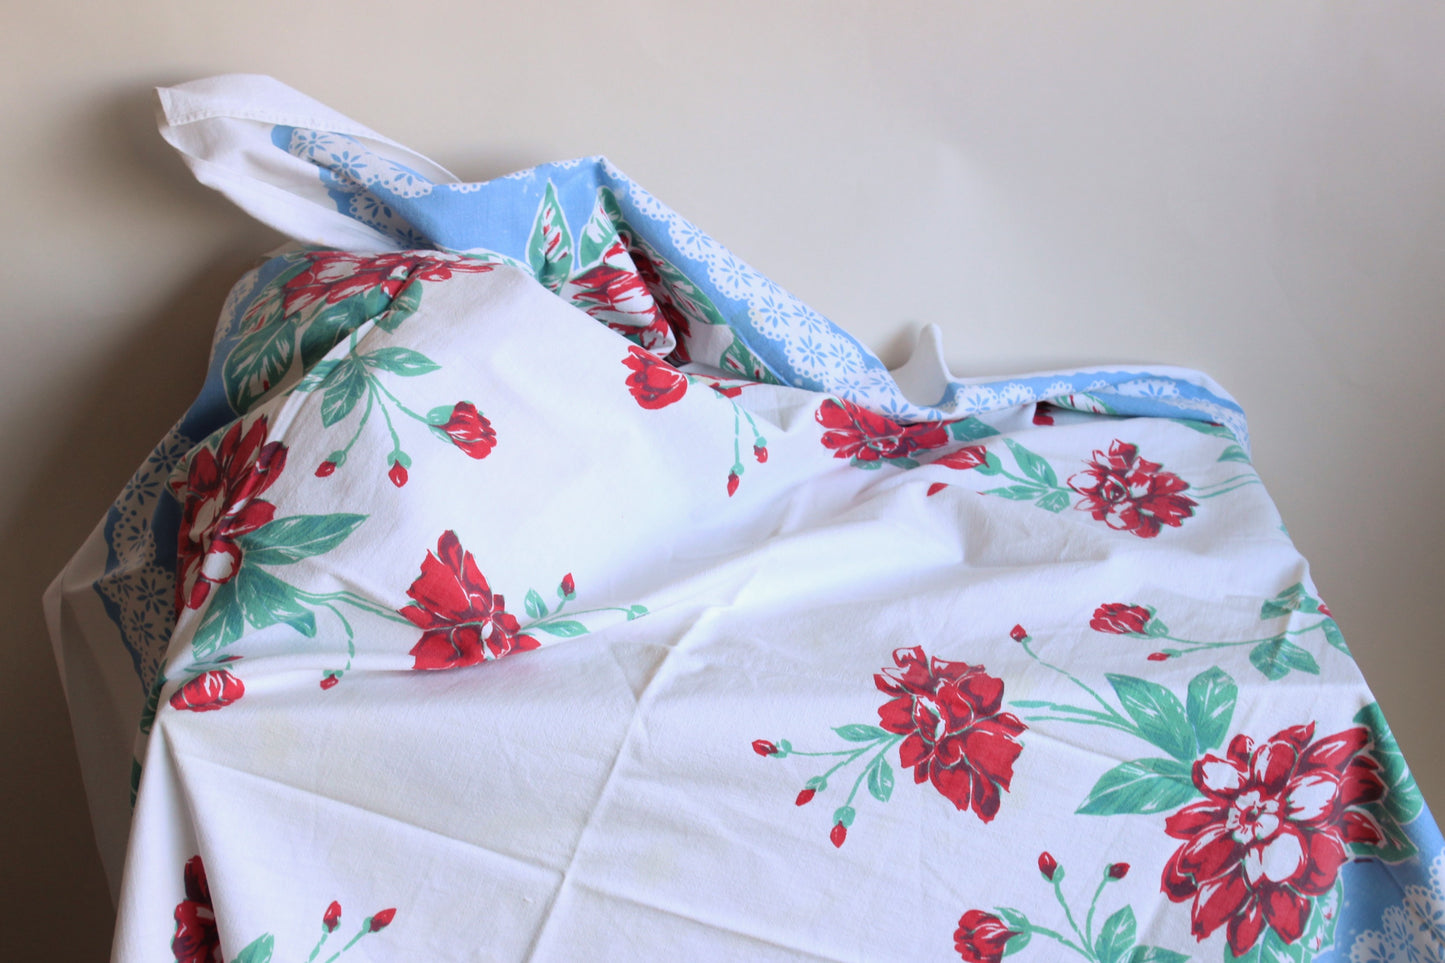 Vintage 1940s, 1950s Tablecloth with red flowers and blue borders